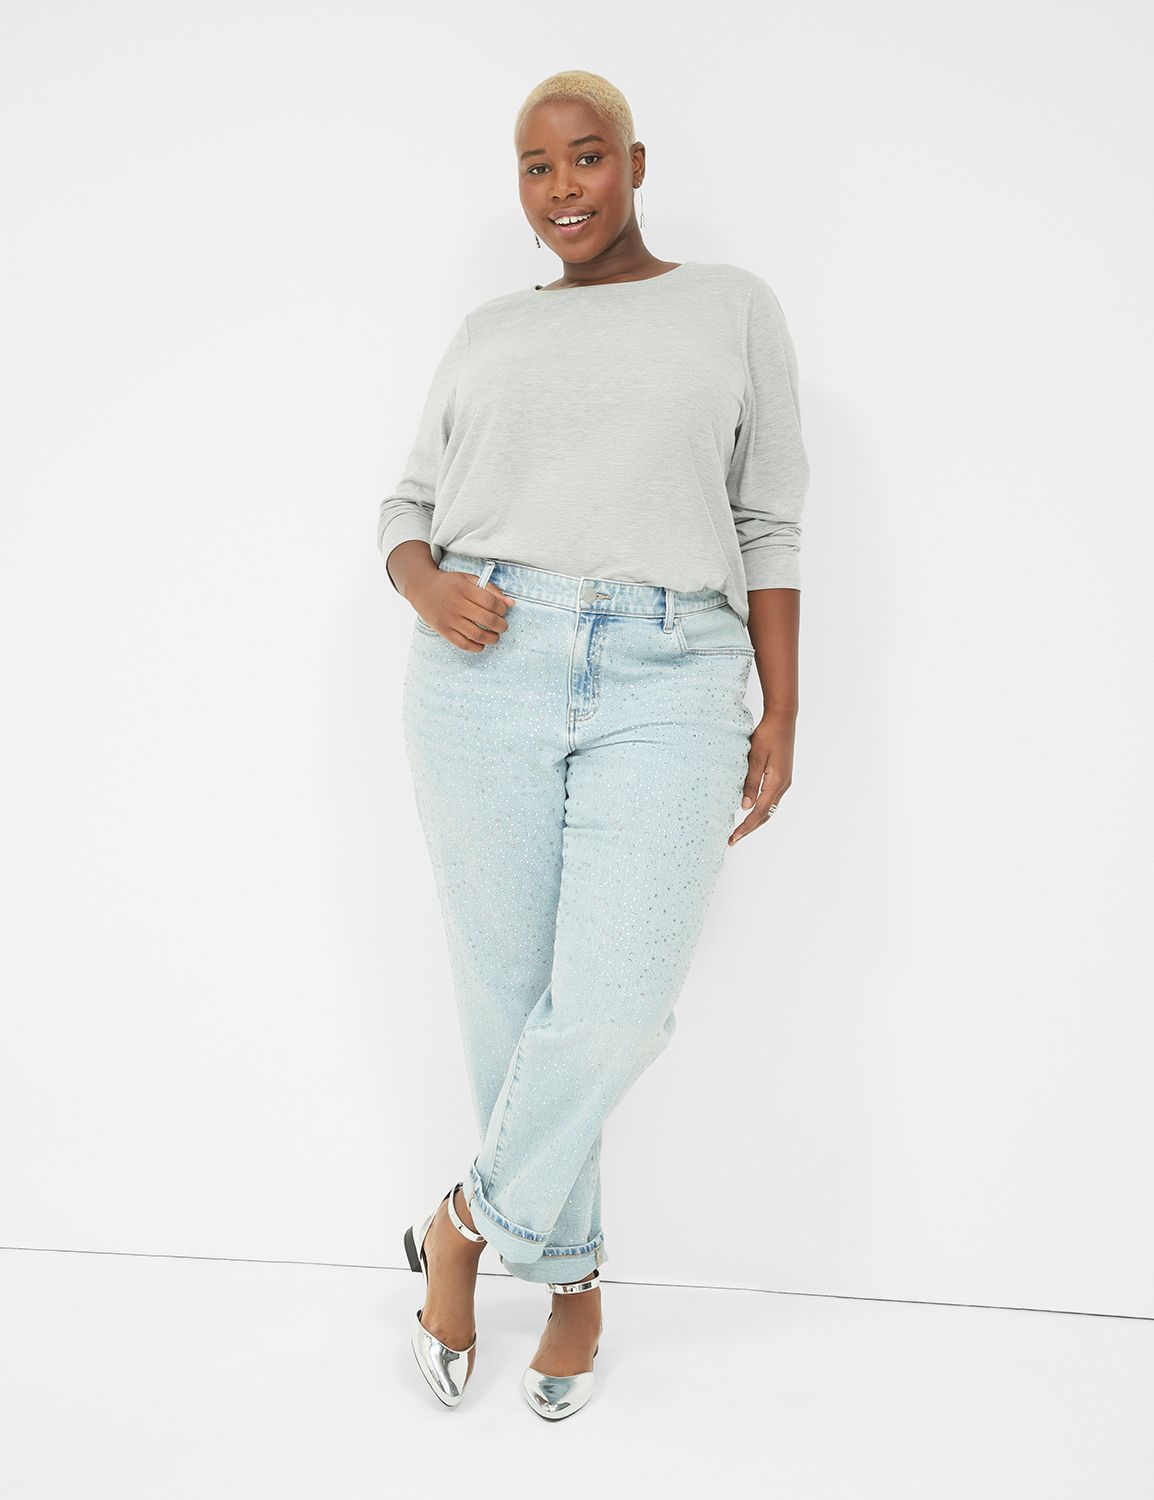  Lane Bryant - Women's Jeans / Women's Clothing: Clothing, Shoes  & Jewelry